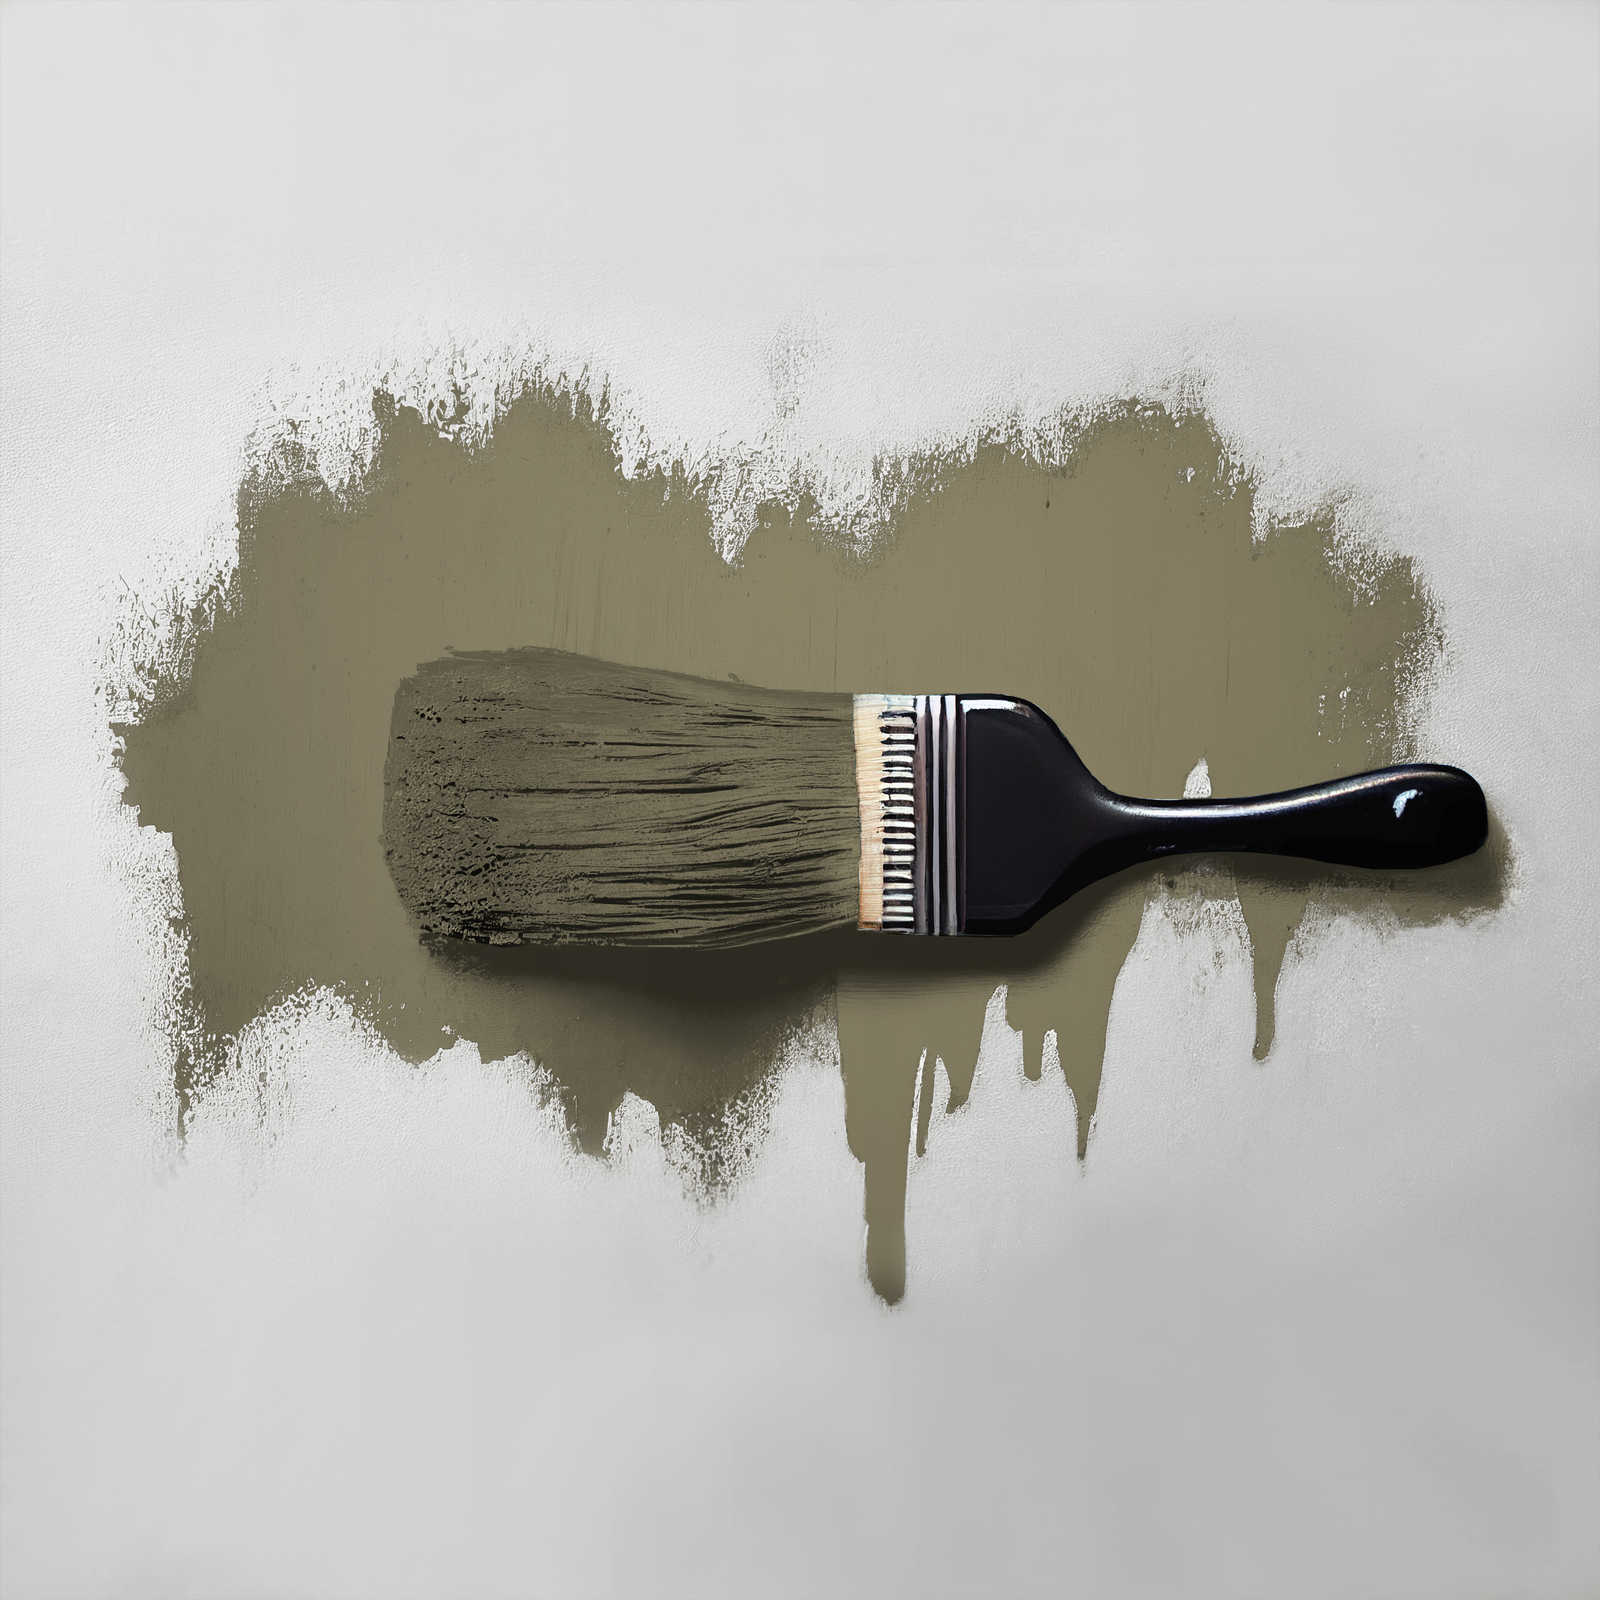             Wall Paint TCK4013 »Ordinary Olive« in intensive olive tone – 2.5 litre
        